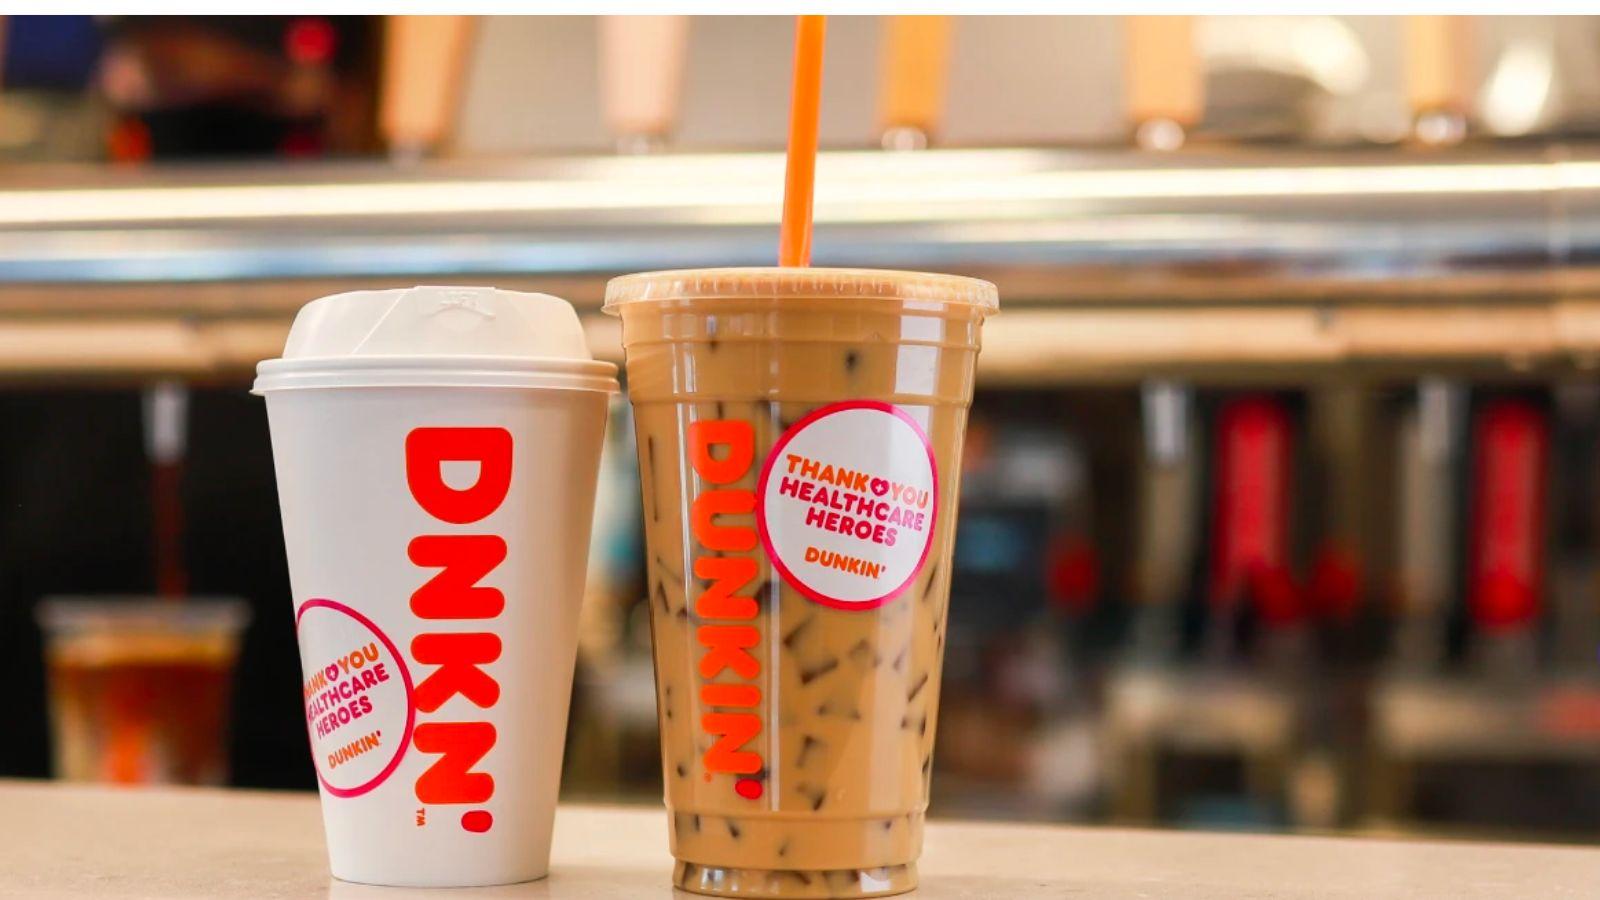 Two dunkin coffees